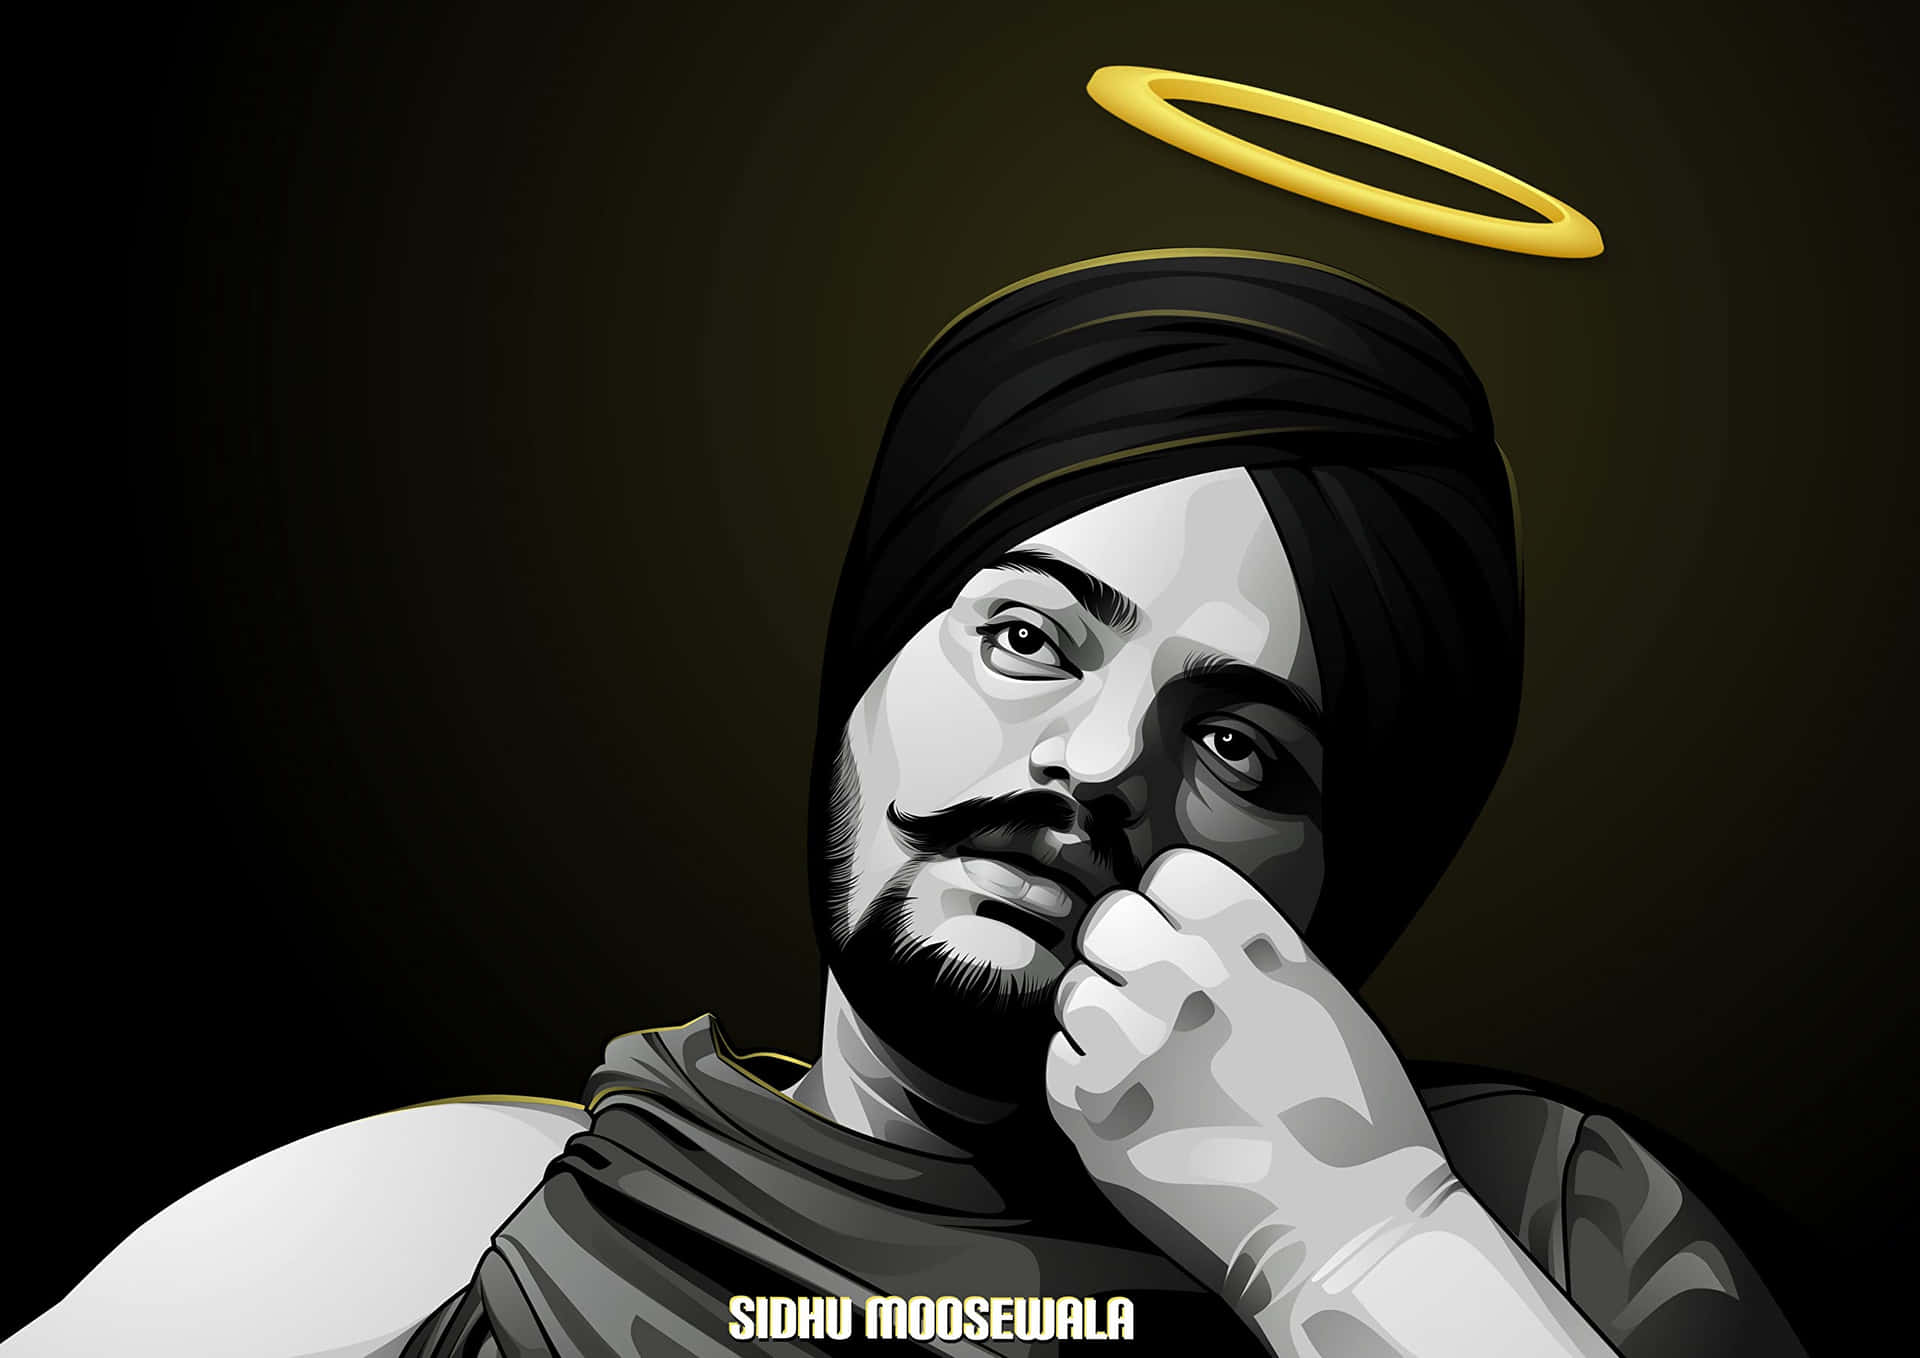 Sidhu Moose Wala Is Ready to Dominate the Music Industry